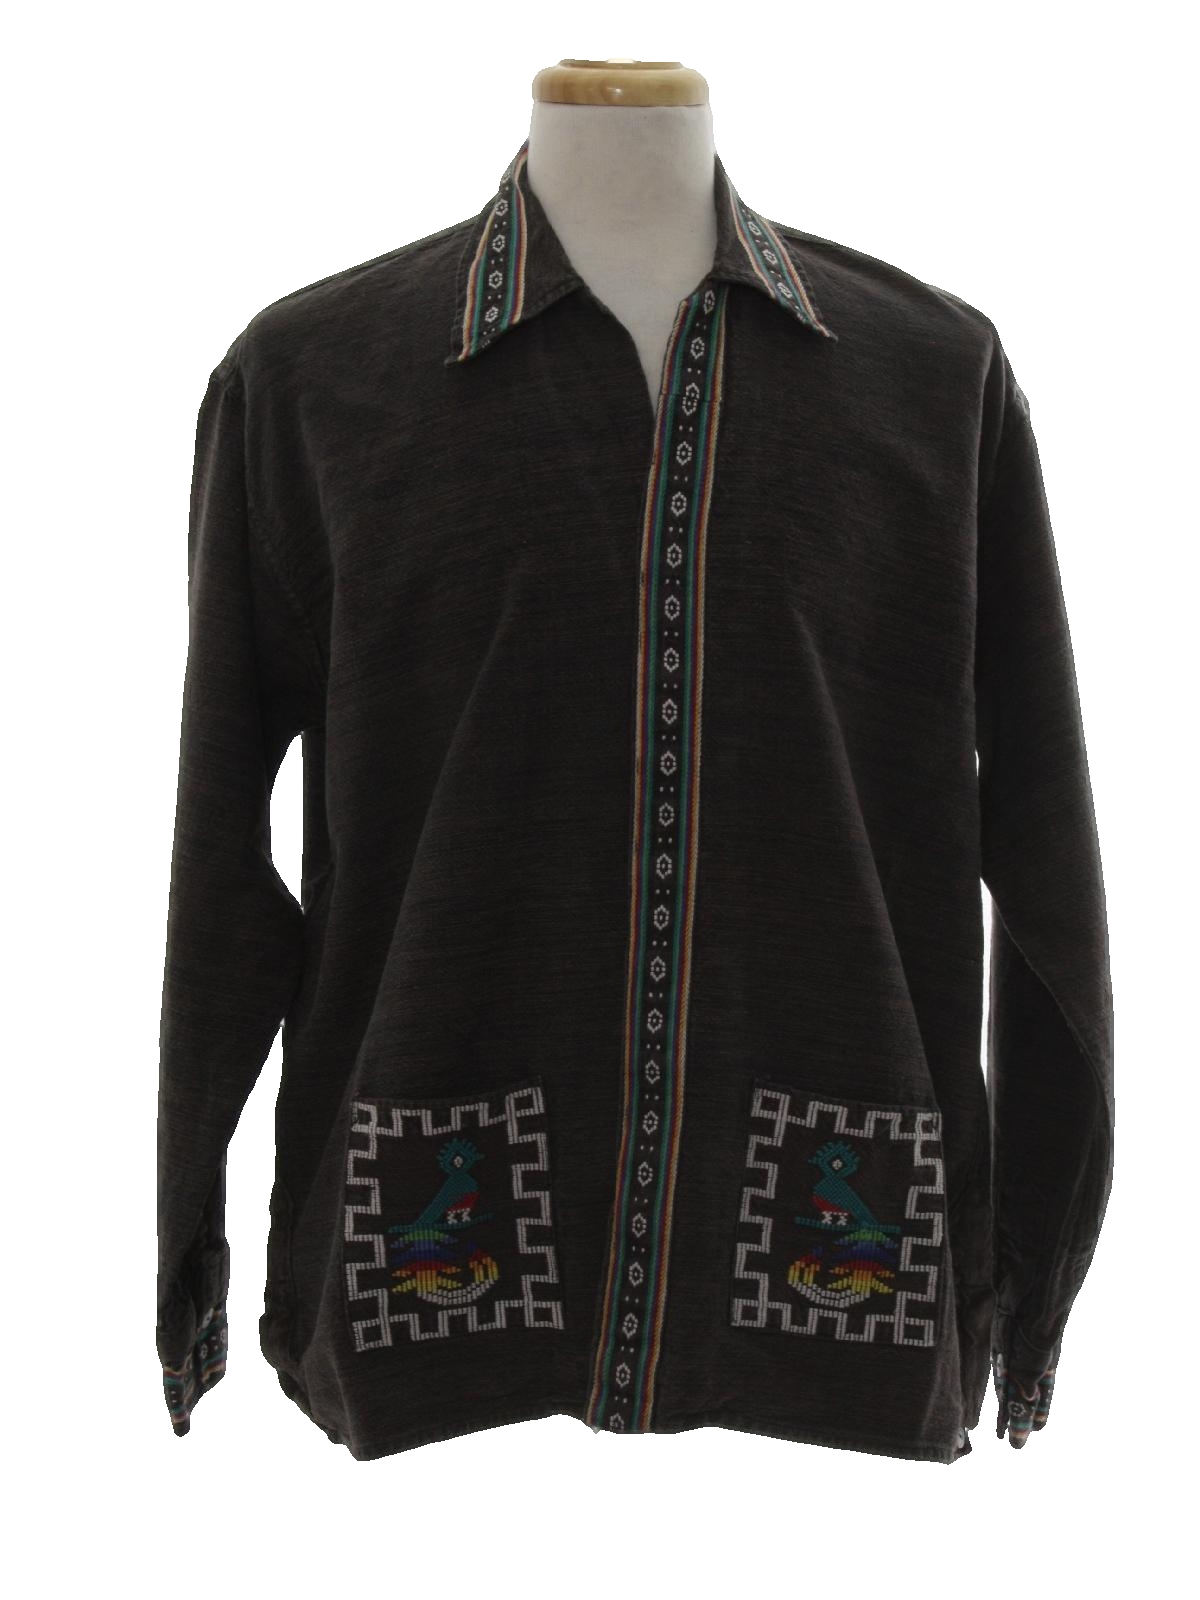 Vintage 80s Hippie Shirt: 80s -No Label- Mens Brown background thick ...